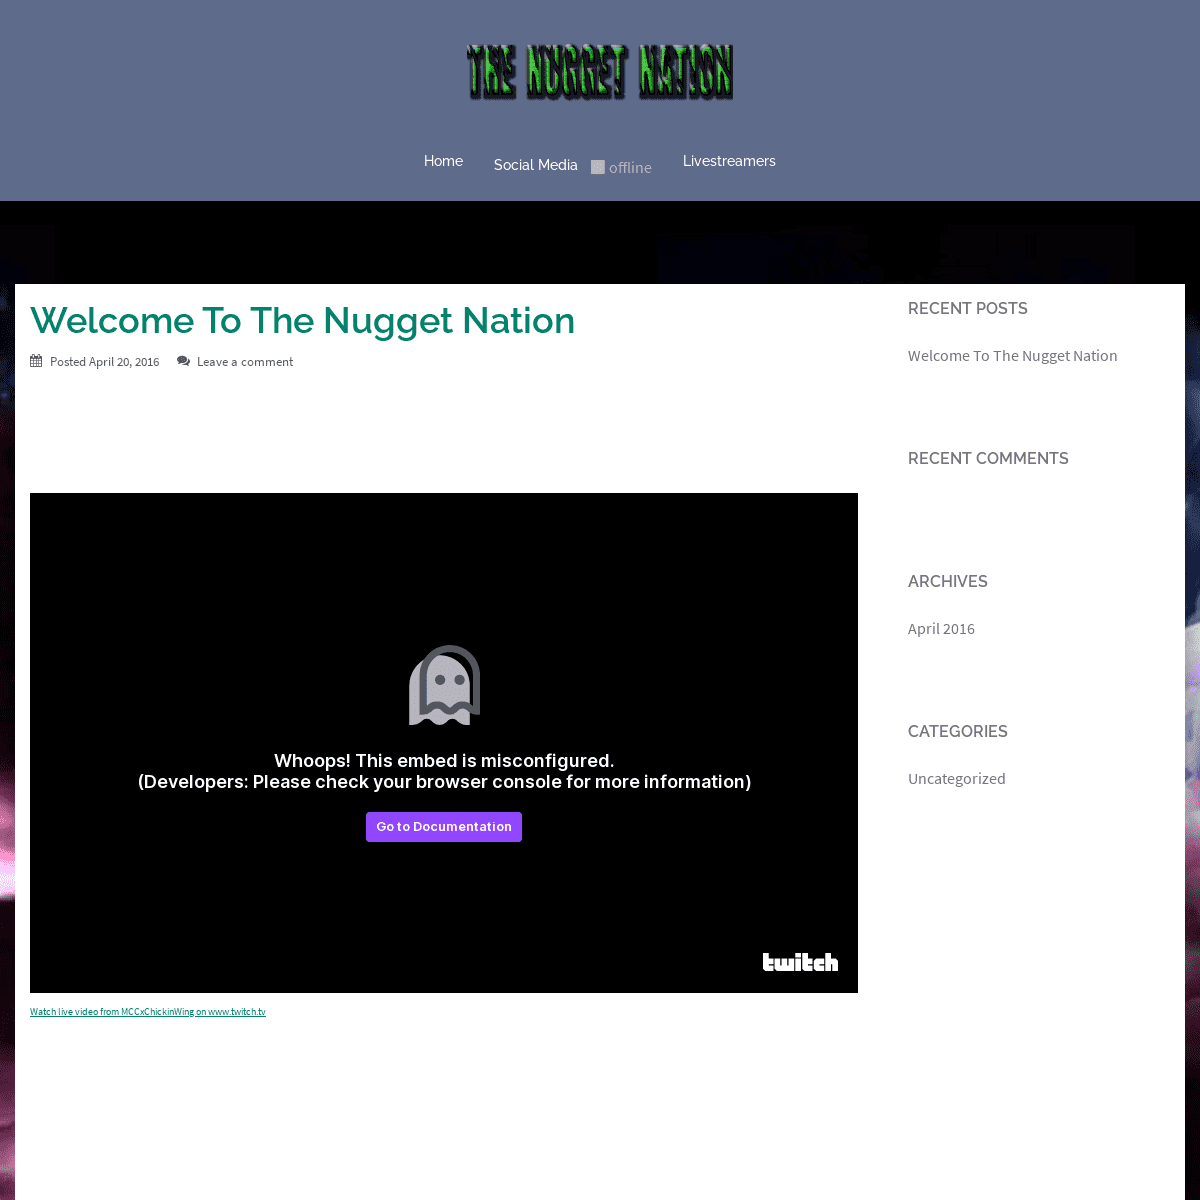 A complete backup of thenuggetnation.com